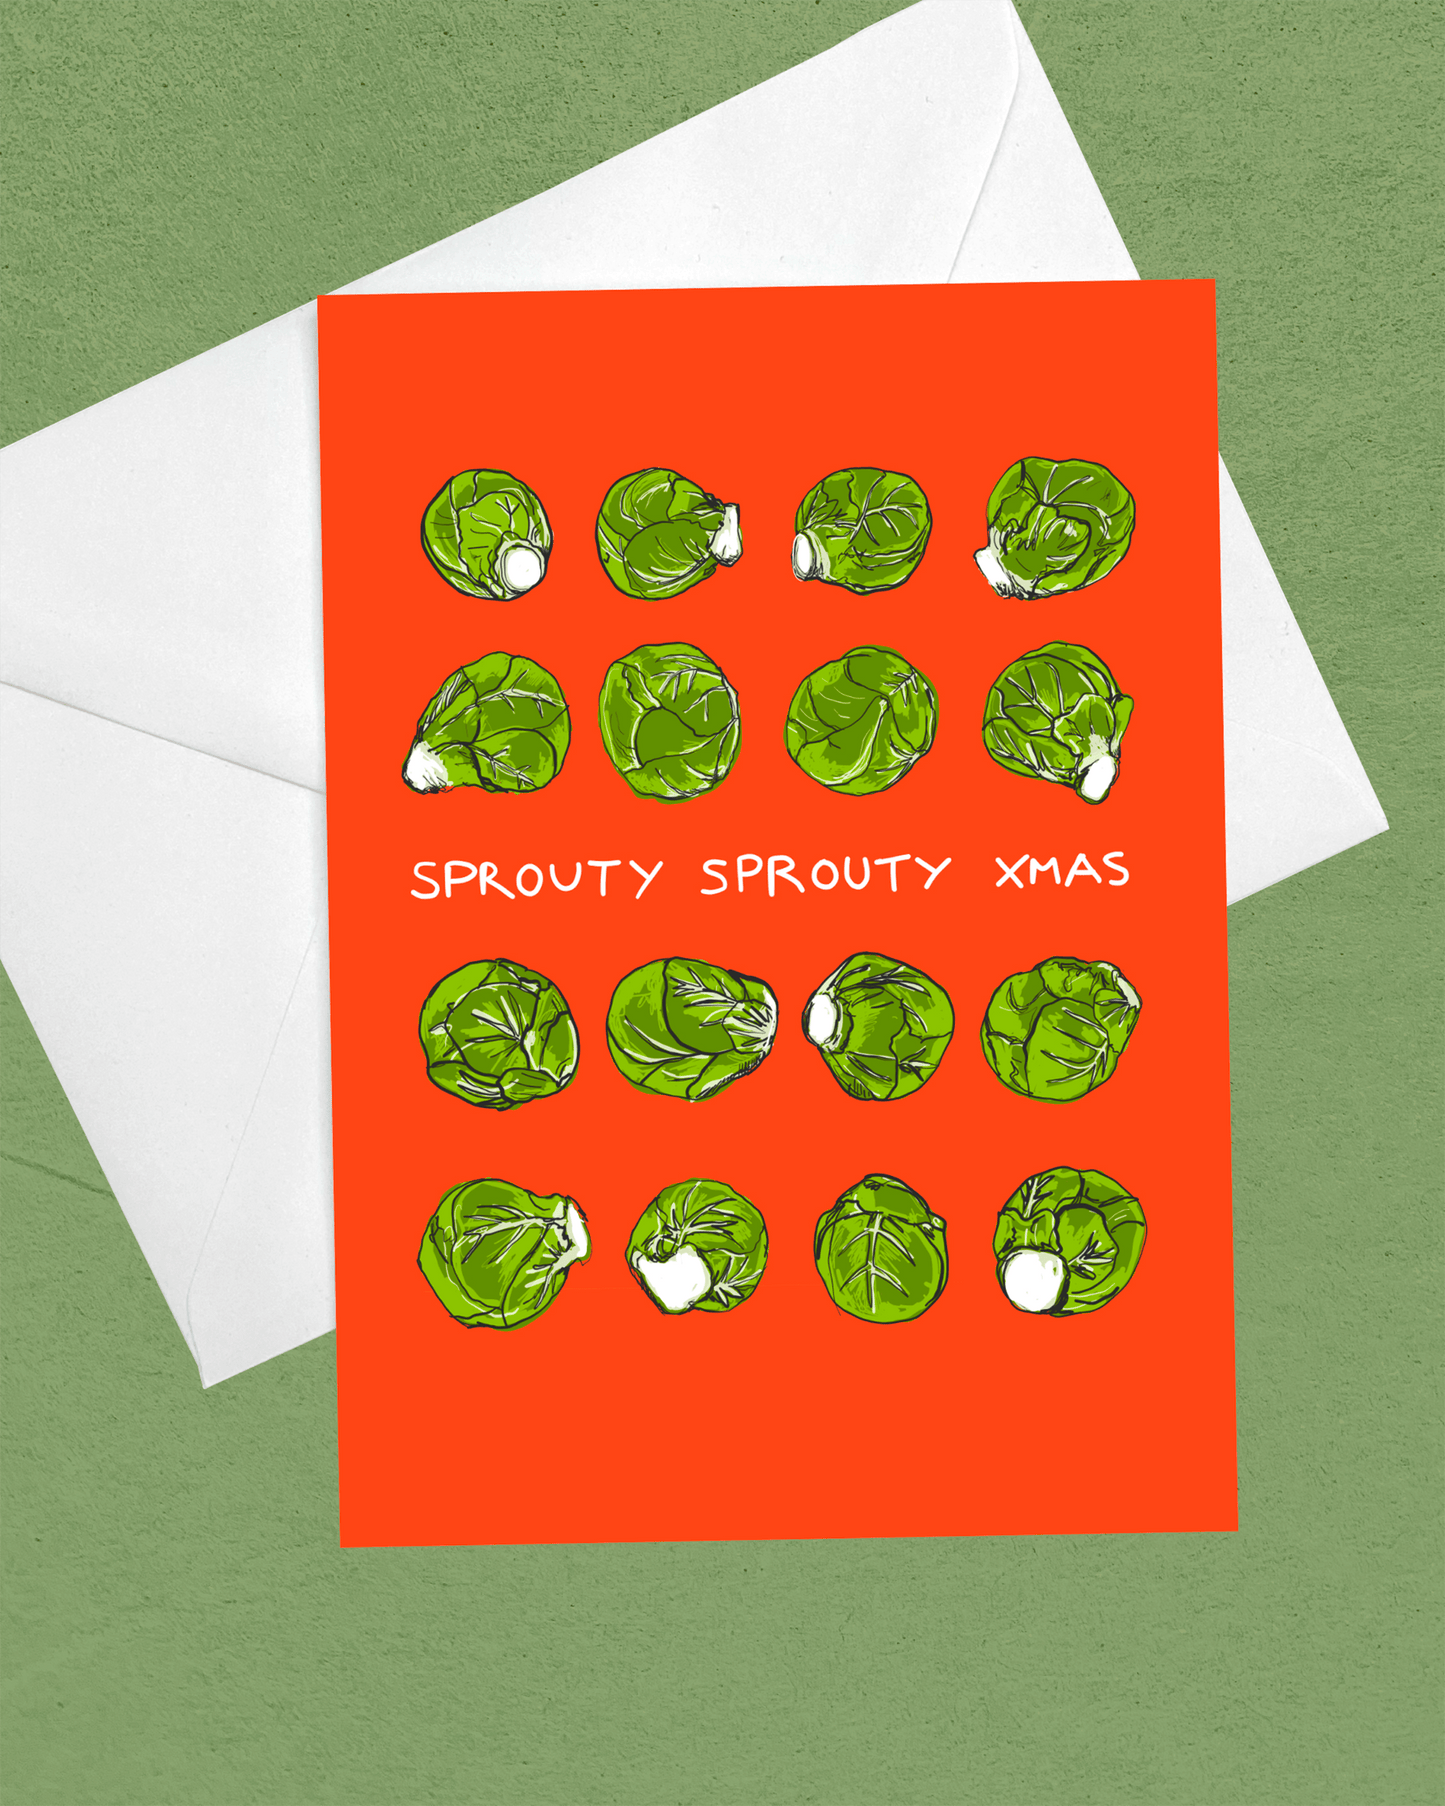 Sprouty Sprouty Xmas